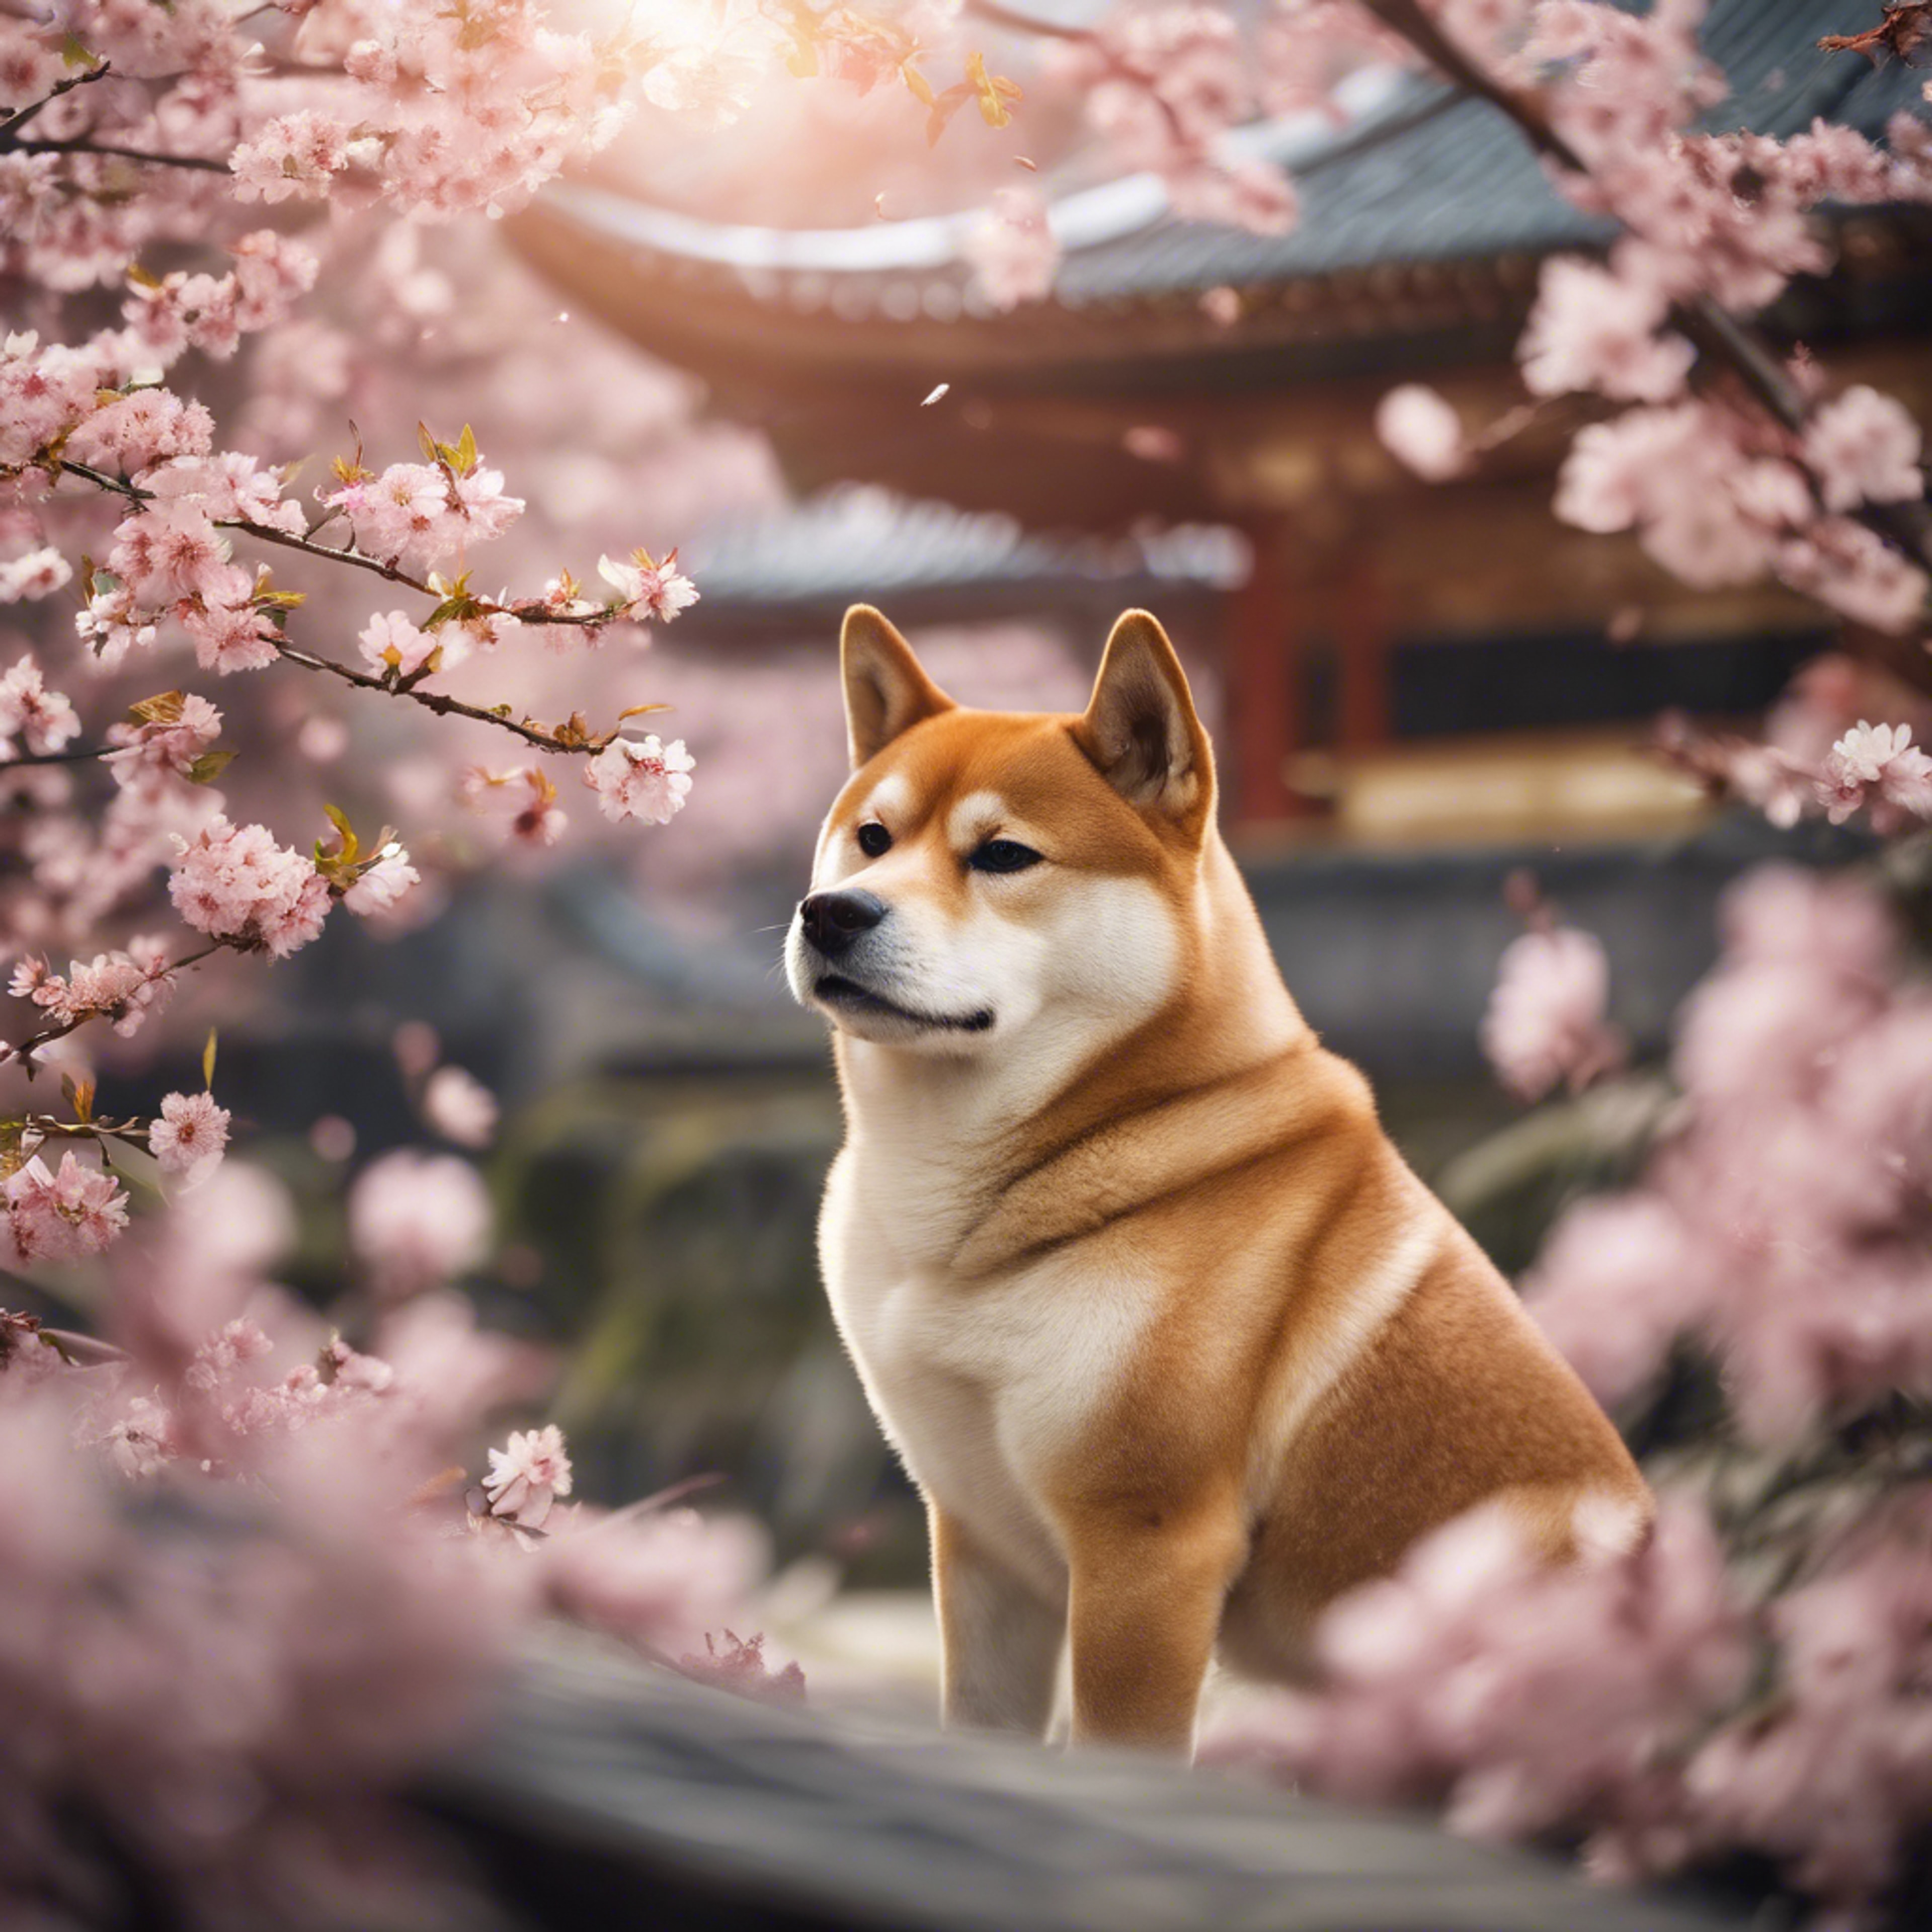 An illustrated scene of a Shiba Inu dog gazing at the tranquil sight of blooming cherry blossoms in a Japanese garden.壁紙[c652b8cb7d00489b966a]